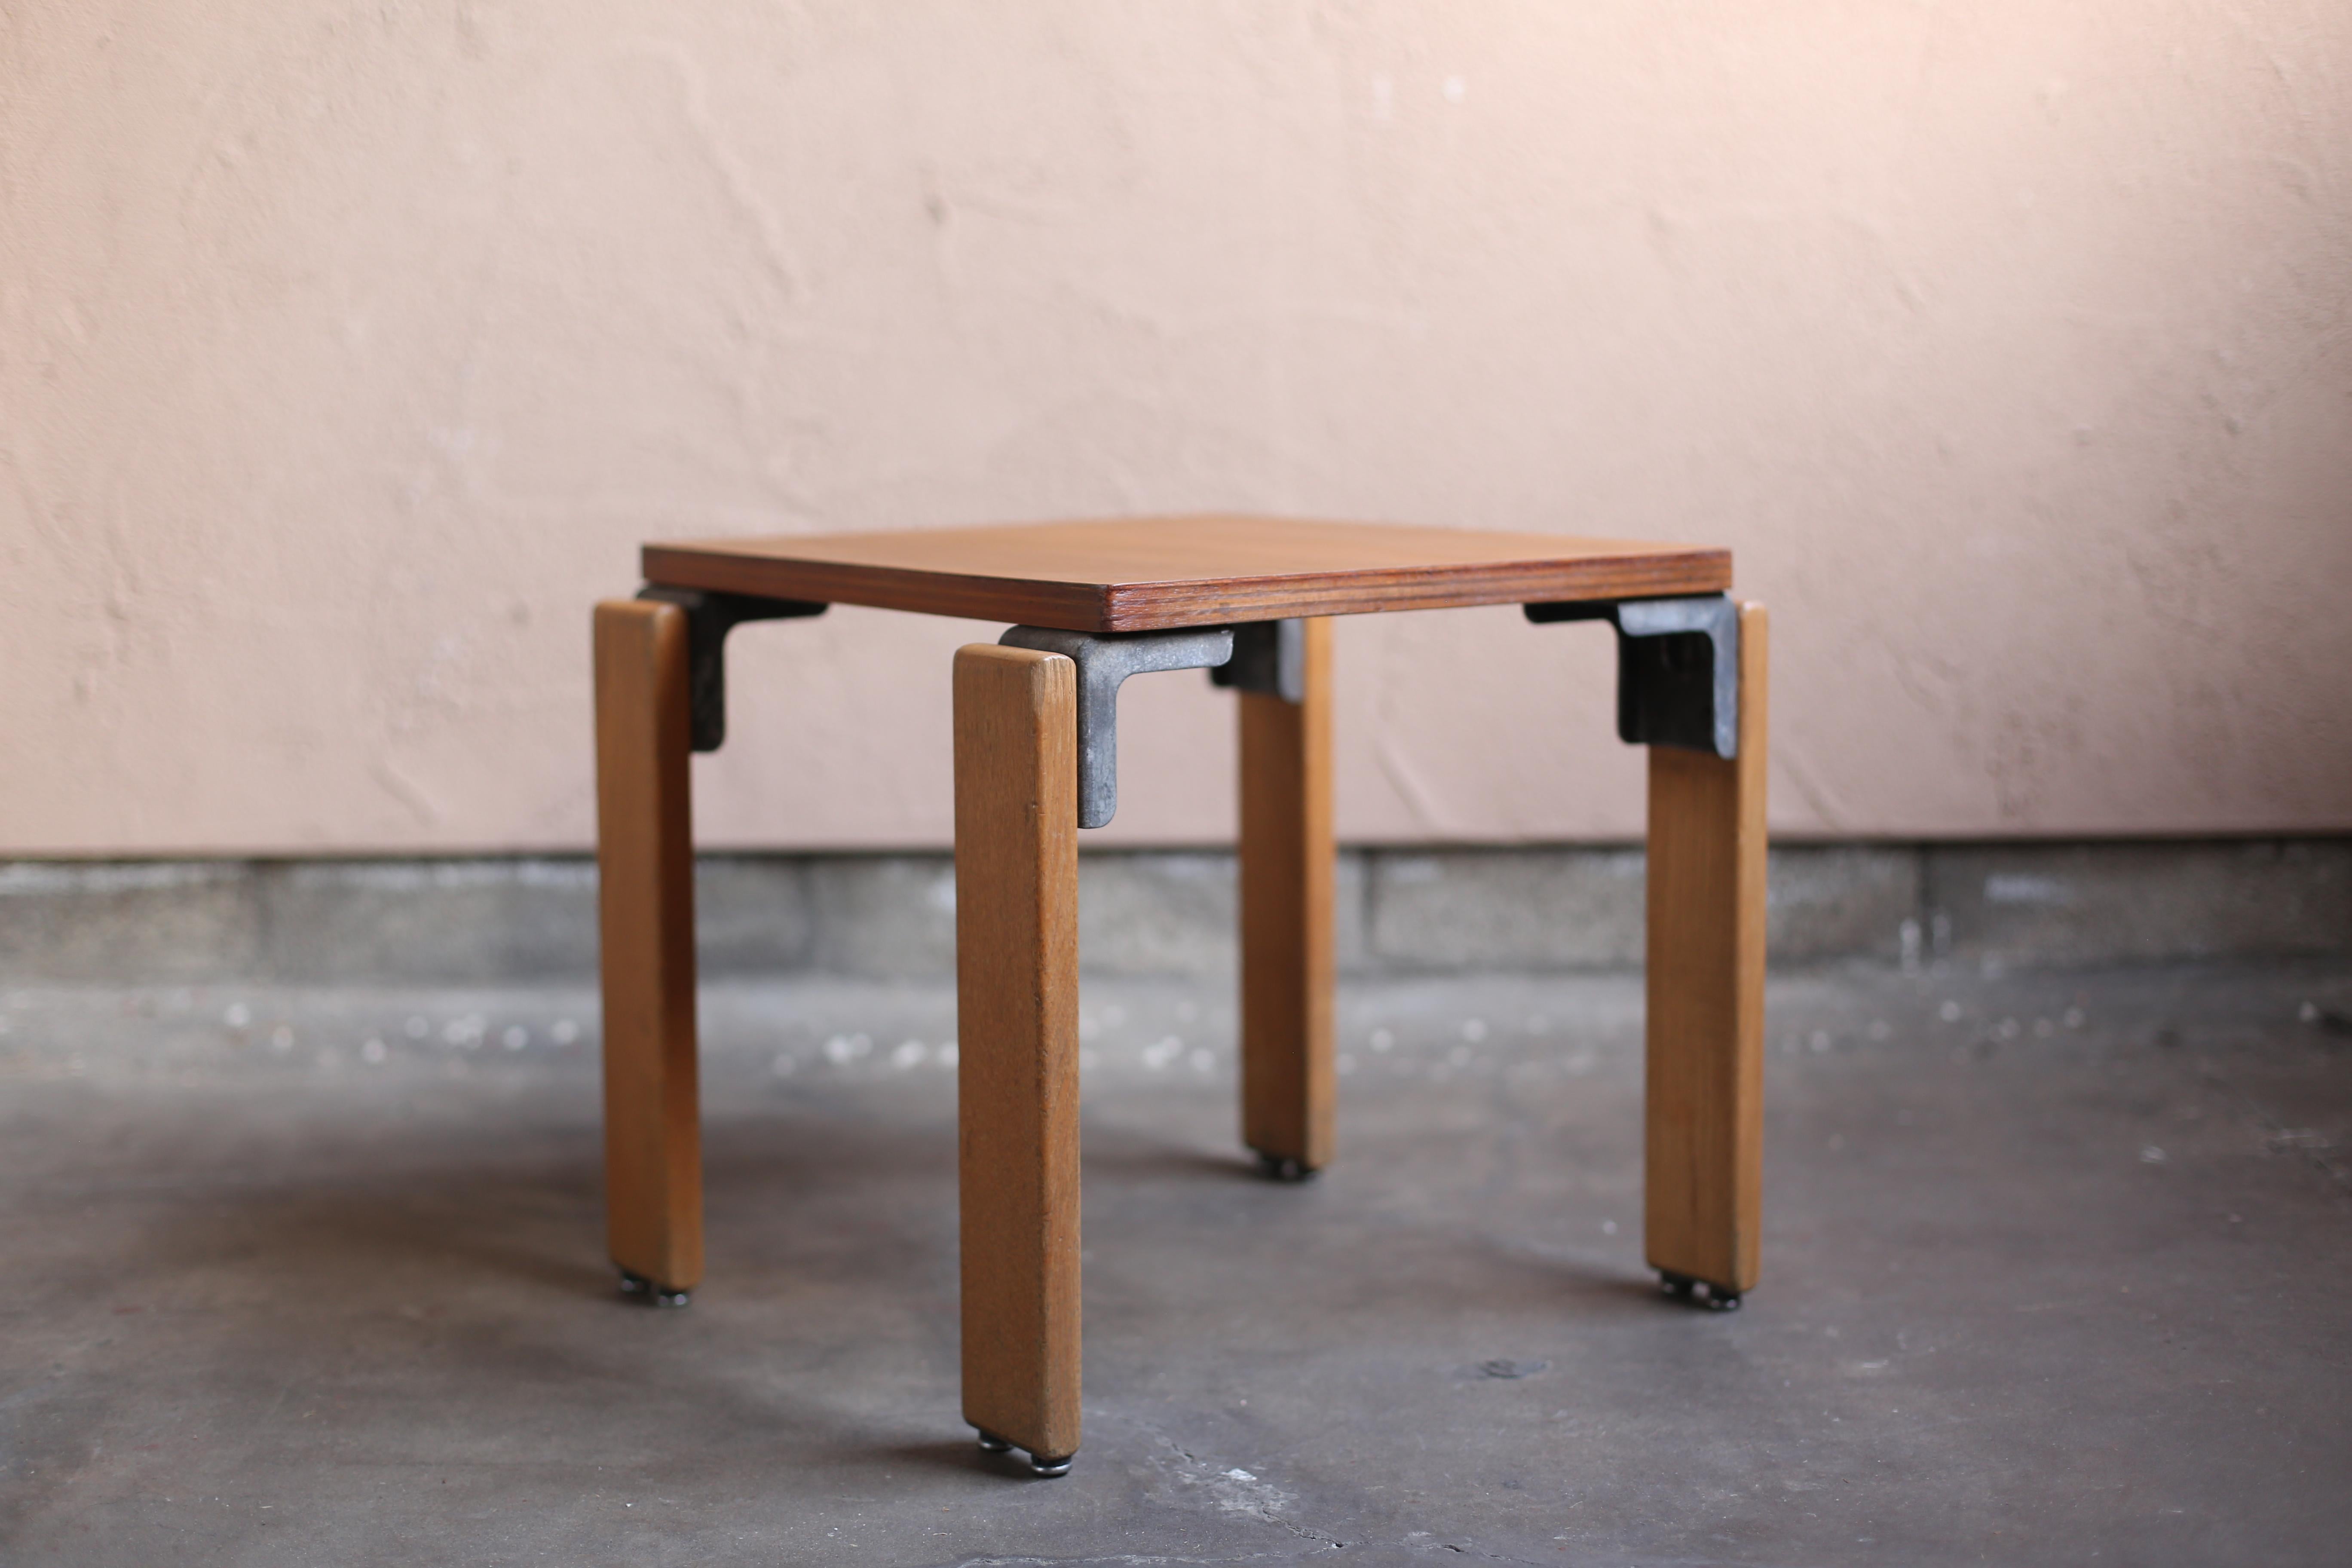 Woodwork “Les Carrats” Stool by Georges Candilis and Anja Blomstetd for Sentou